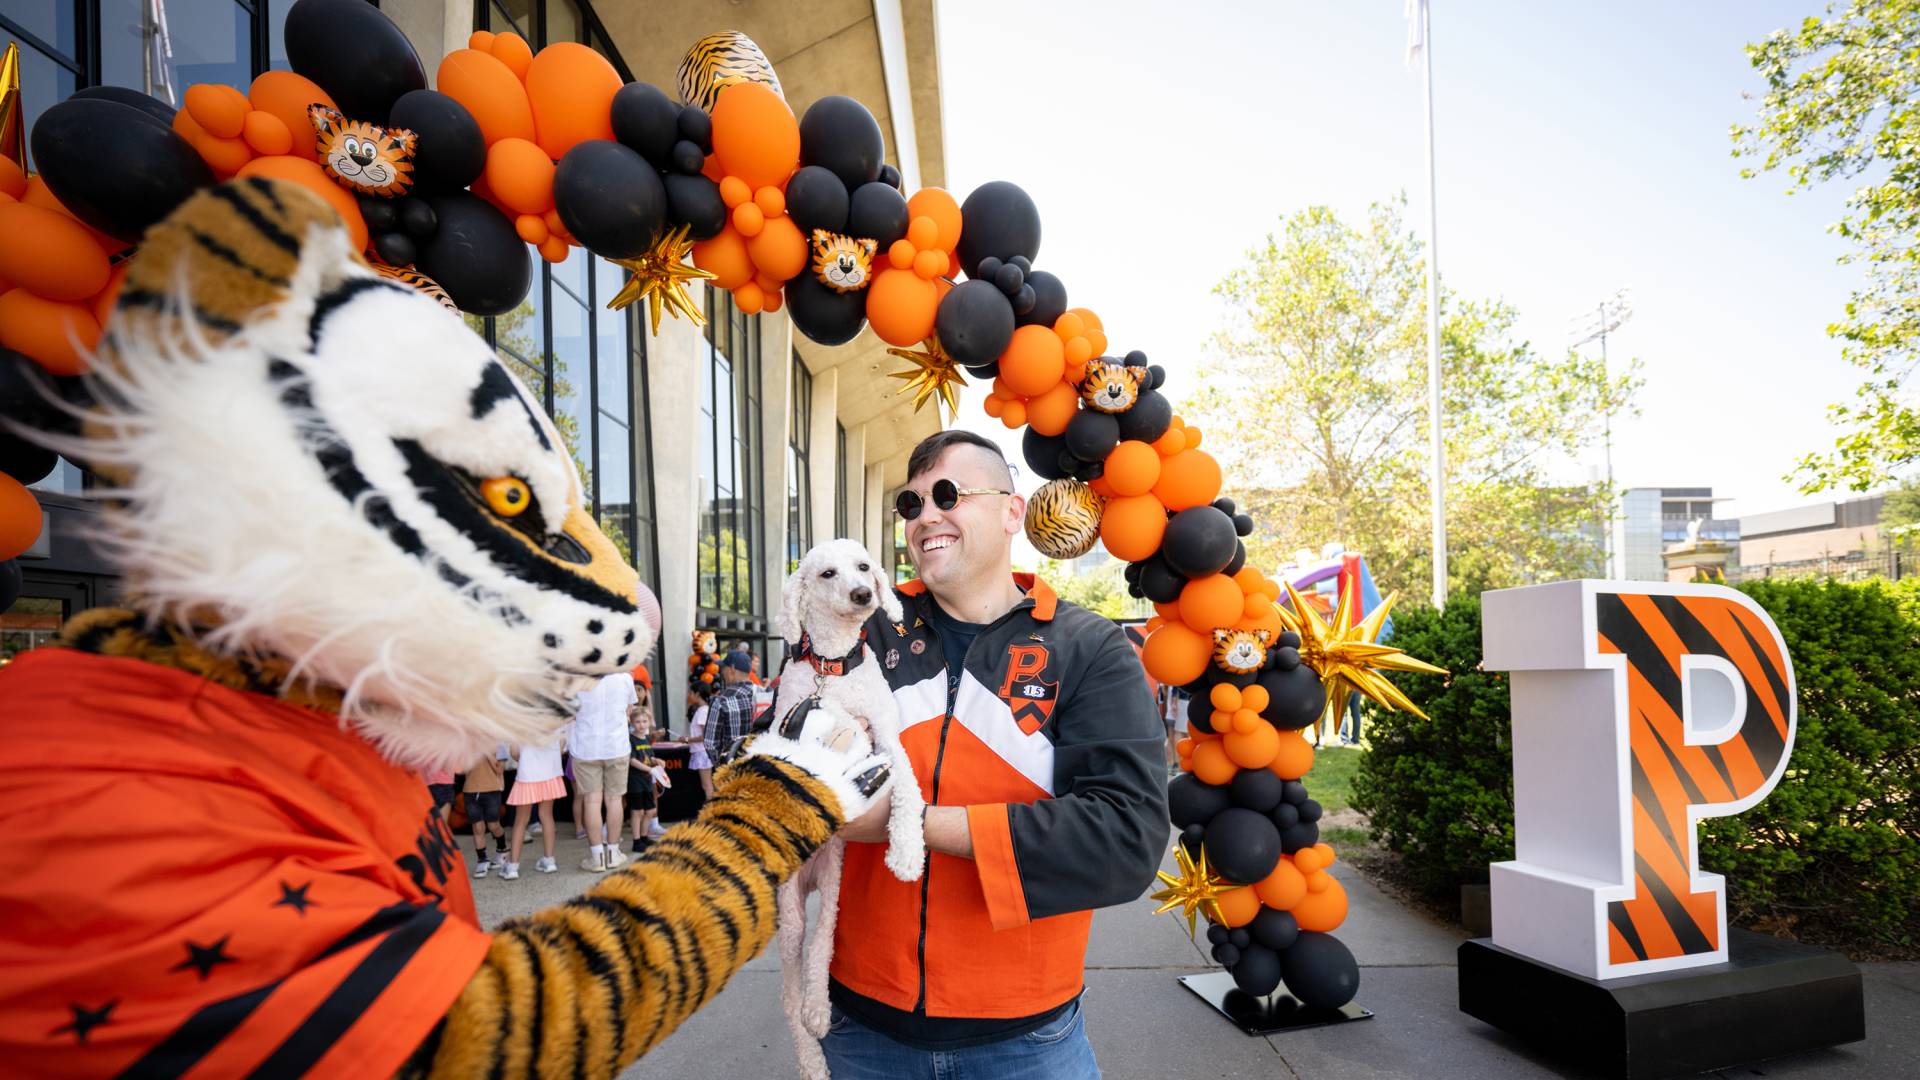 Tiger mascot, balloon arch, dog, alumnus, and tiger-striped intial P